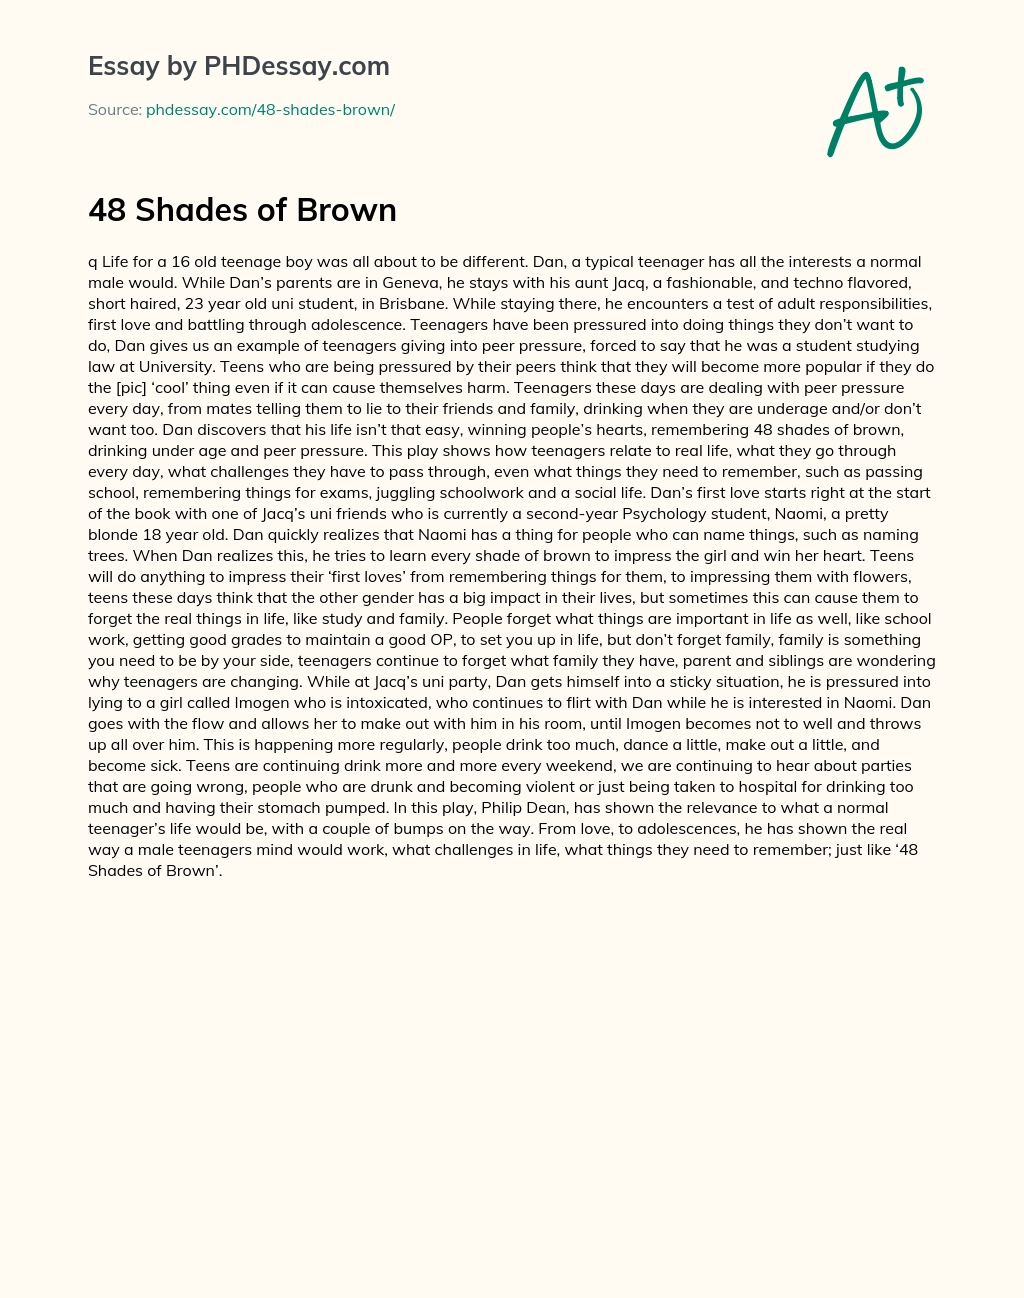 48 Shades of Brown essay